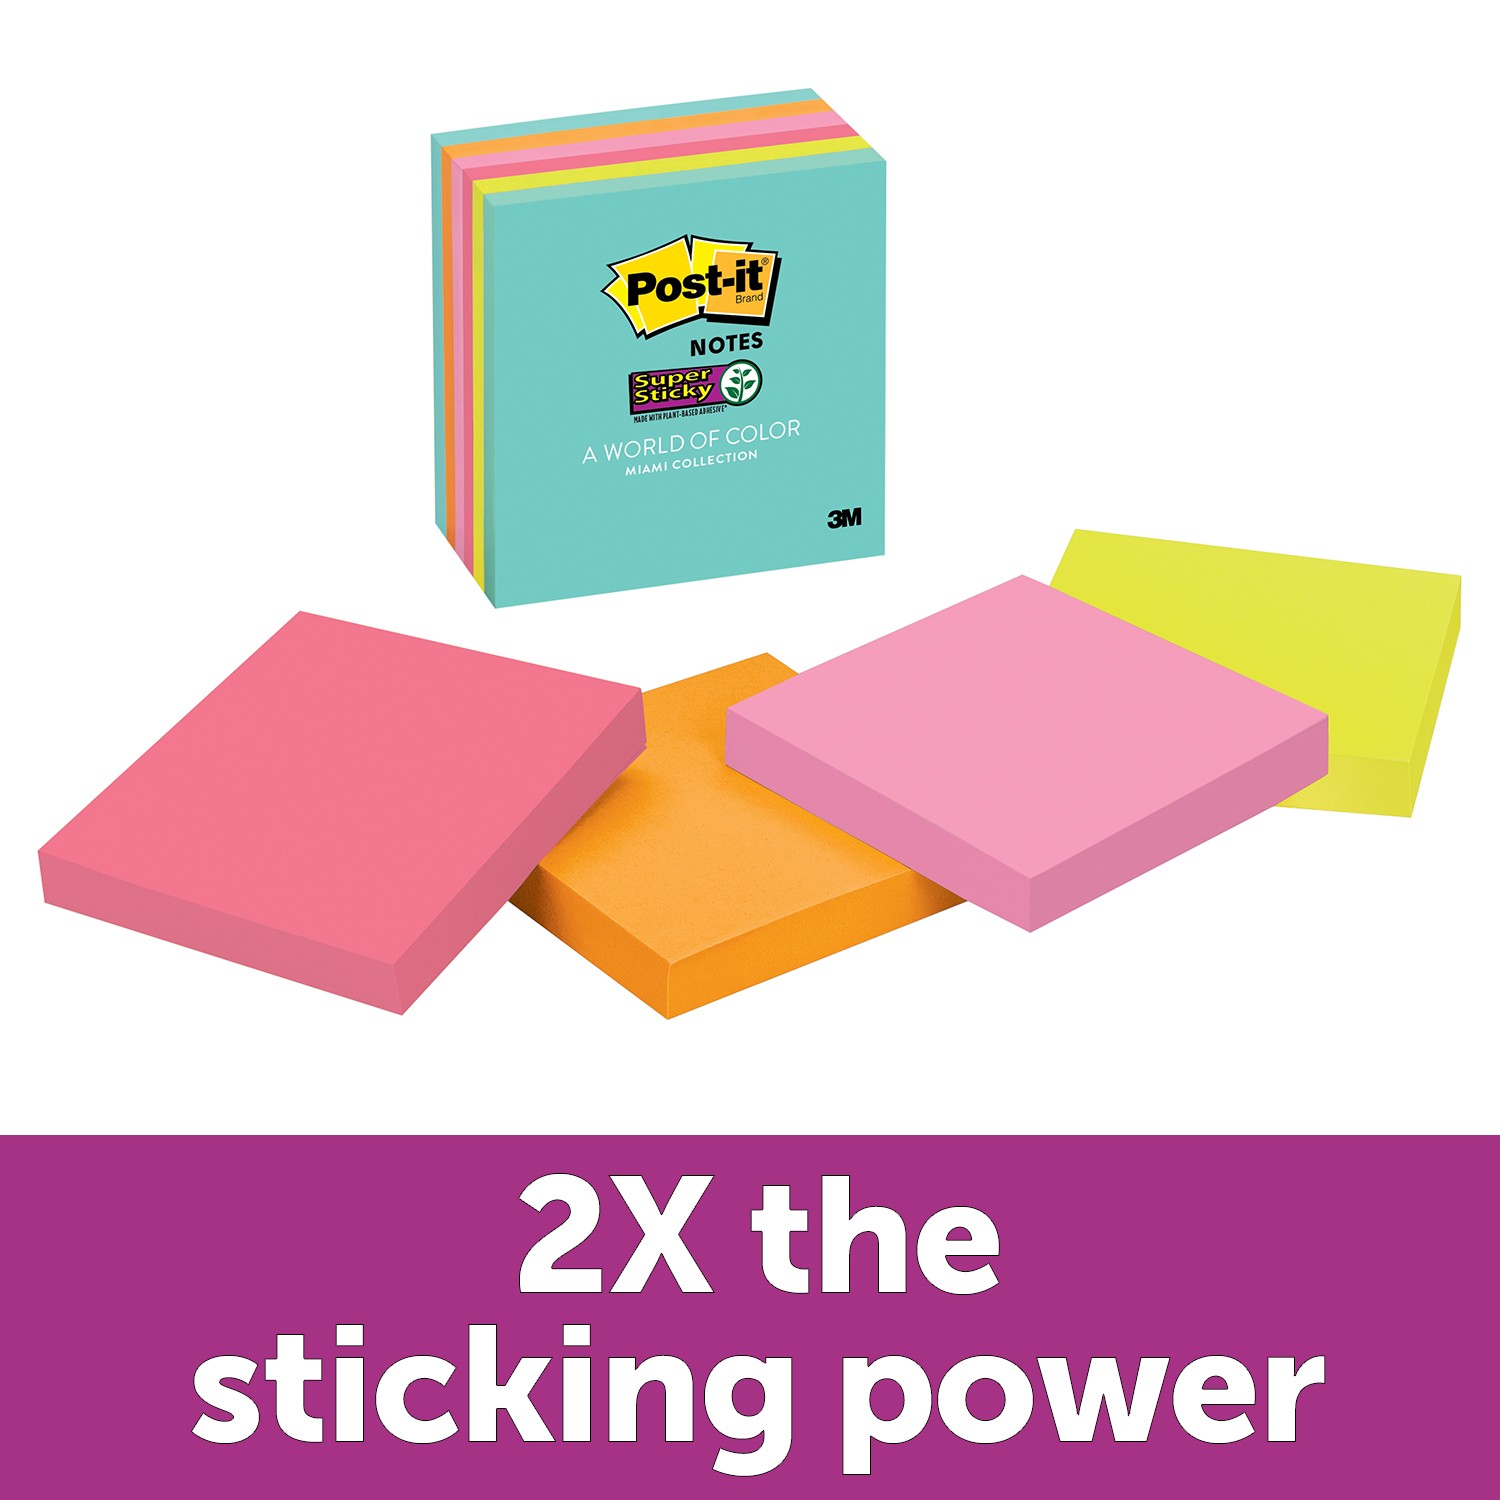 Post-it Star and Heart-Shaped Note Pads - 3 x 3 - Star, Heart - 75 Sheets per Pad - Unruled - Assorted - Self-Adhesive, Self-Stick